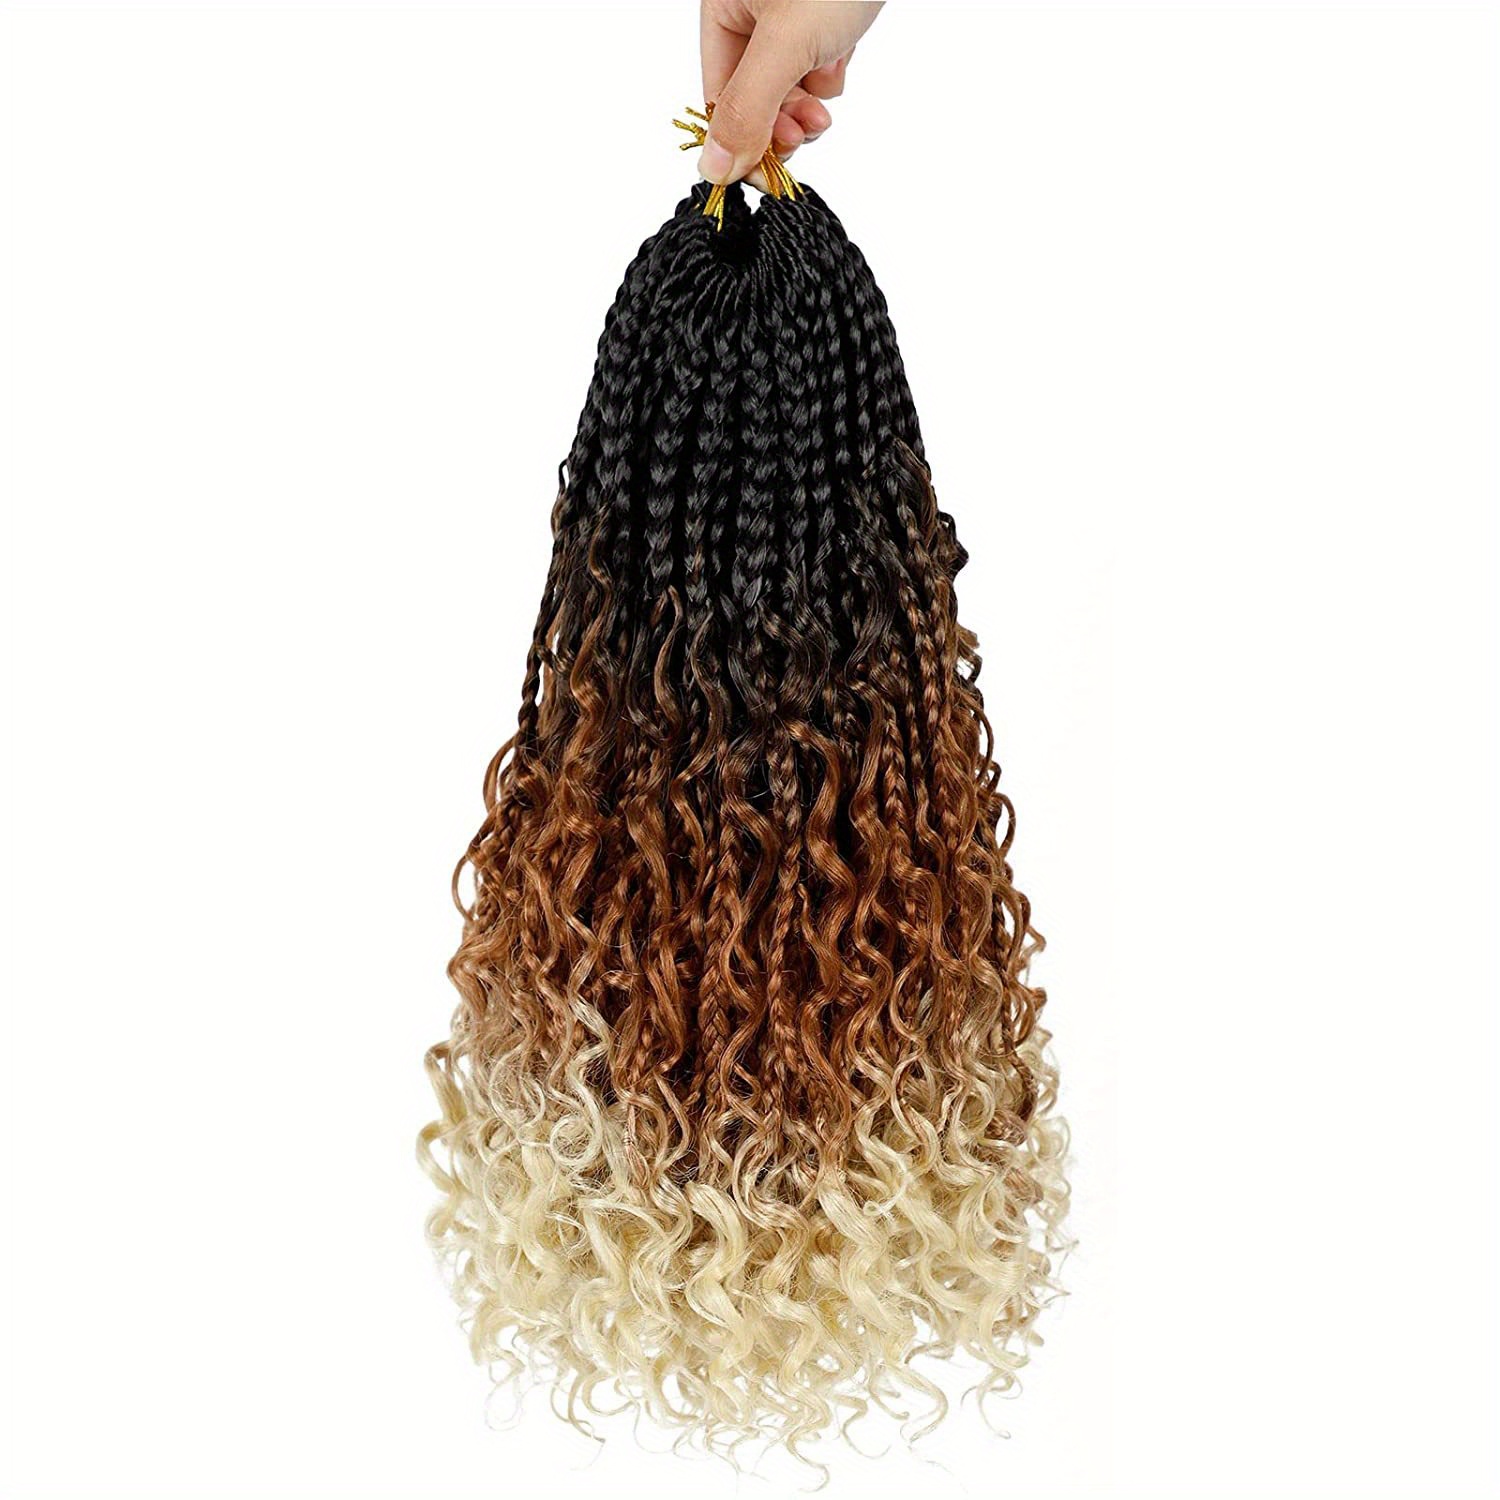 Crochet Box Braids Curly Ends 10 Inch Short Goddess Box Braids Crochet Hair  Pre Looped Crochet Braids From Dingyushangmao, $11.53